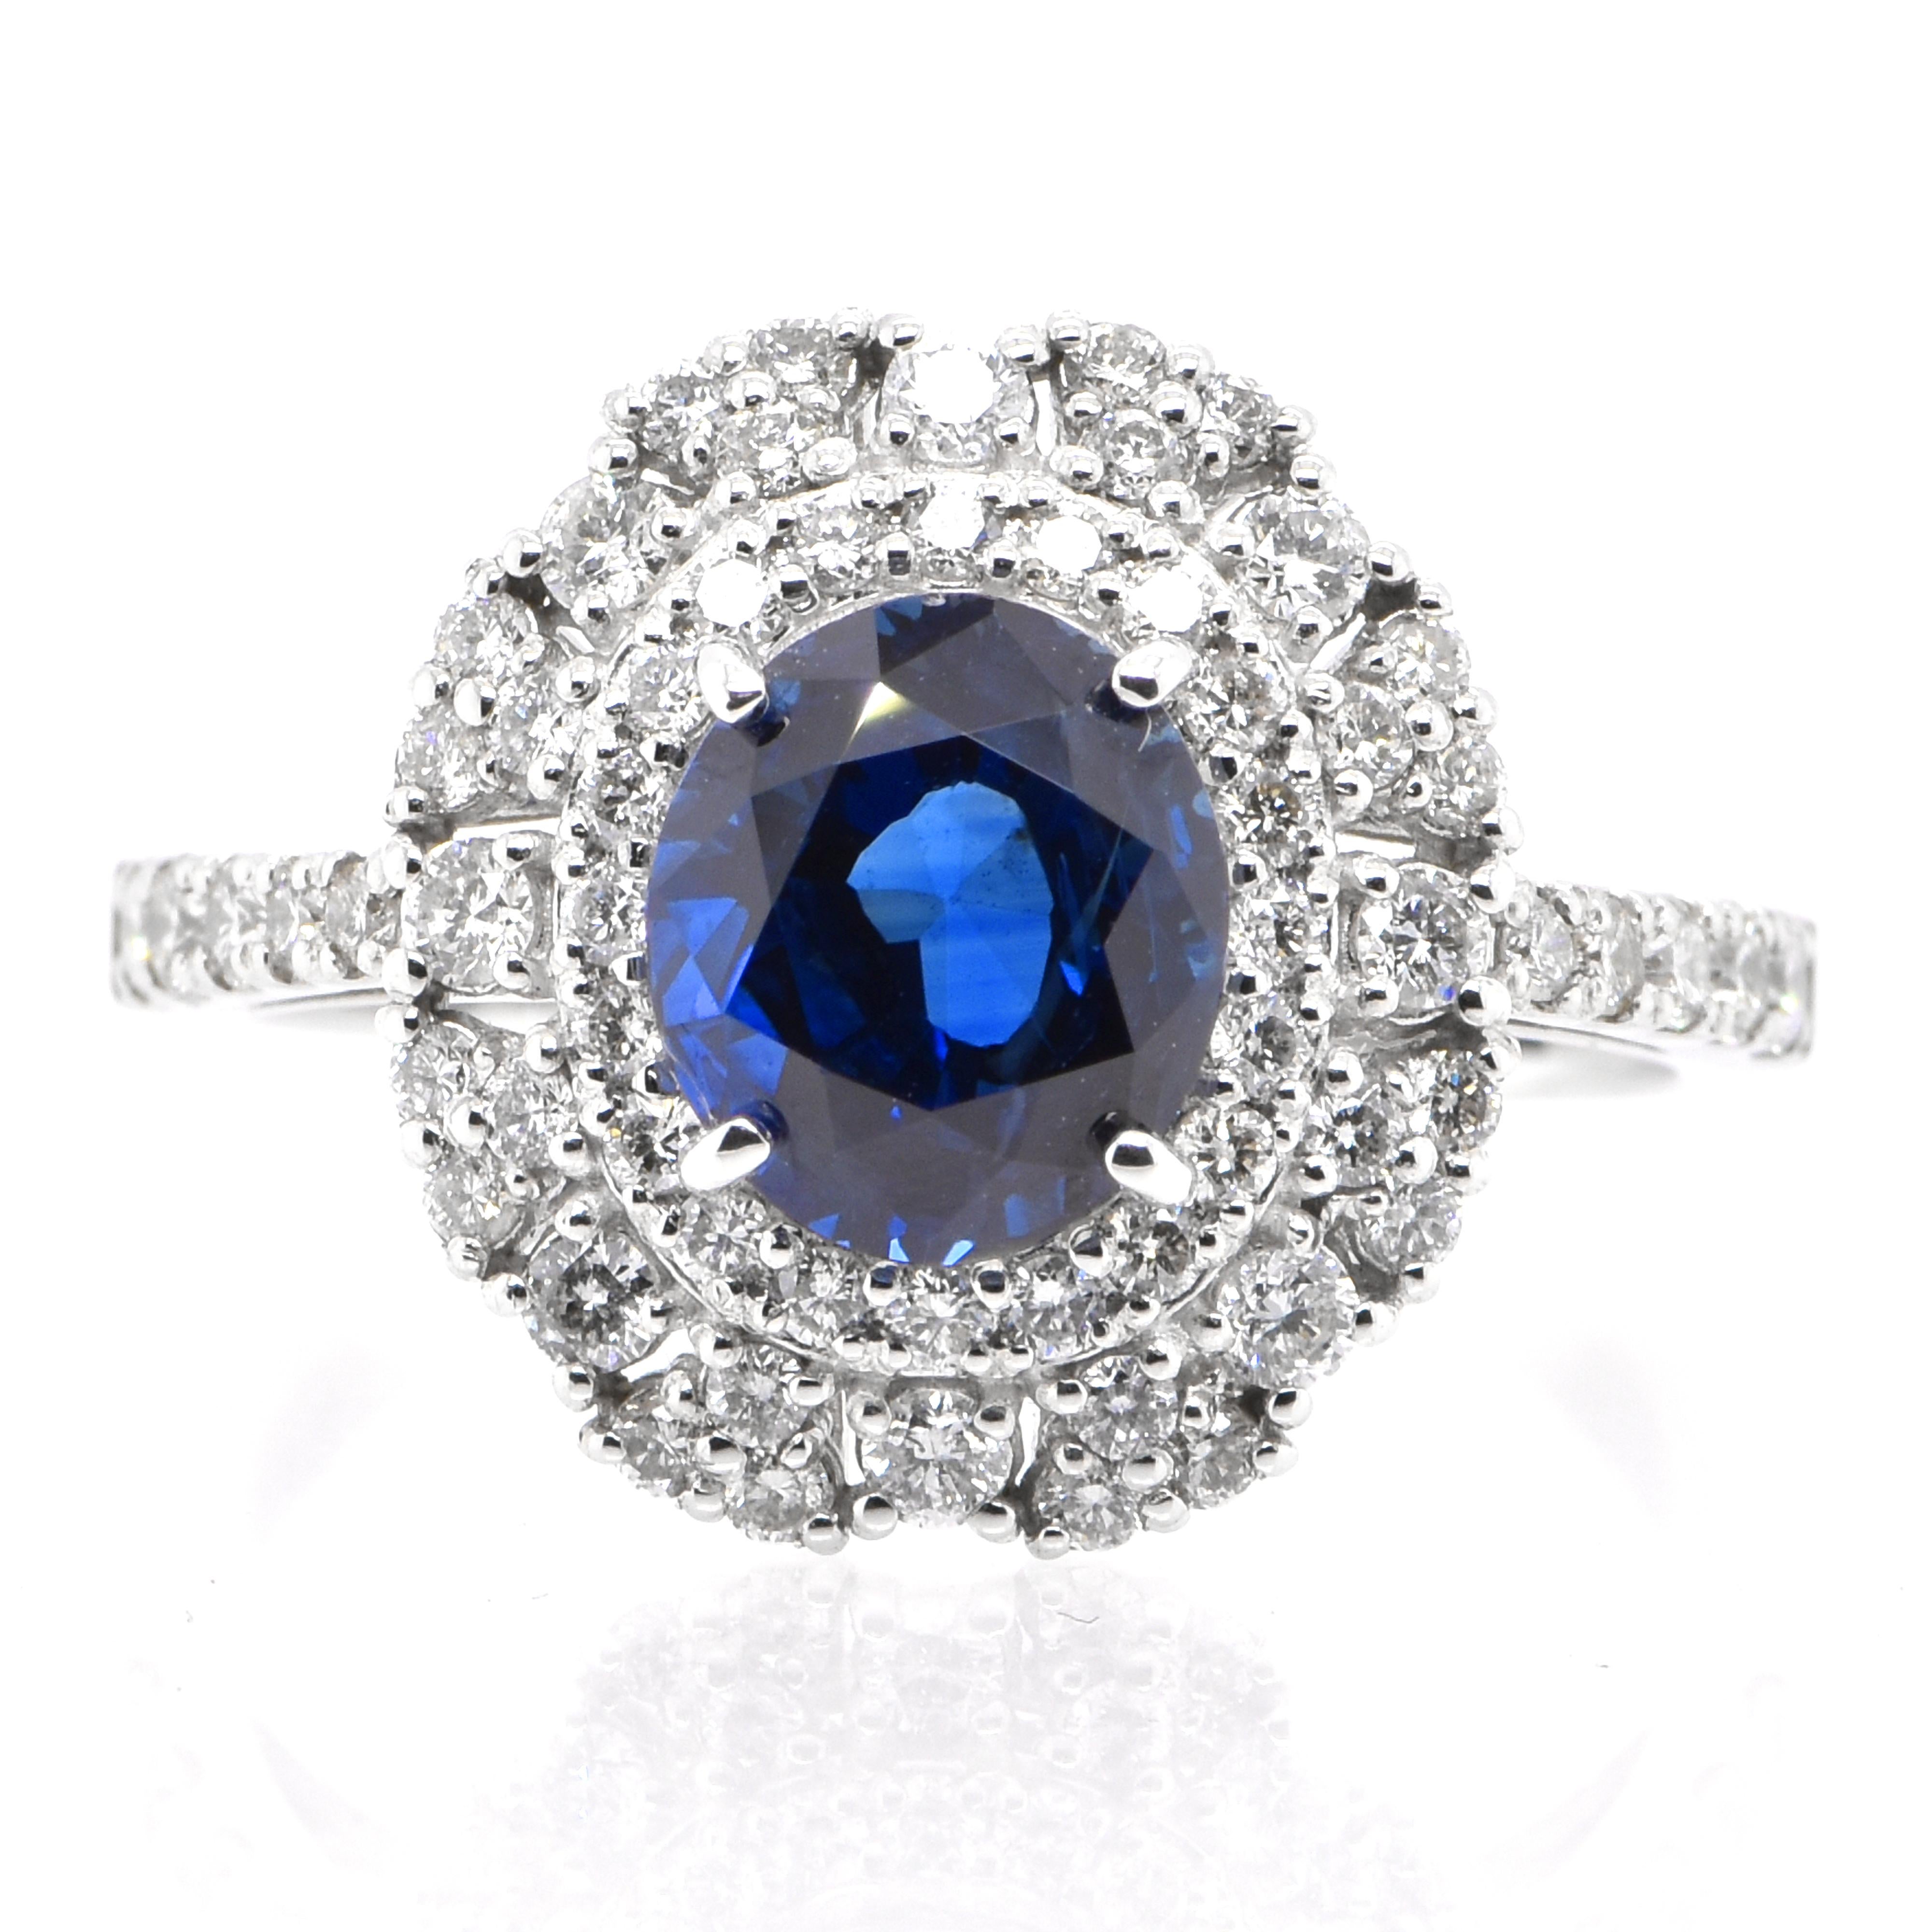 A beautiful ring featuring AIGS Certified 2.32 Carat, Natural Royal Blue Sapphire and 0.65 carats Diamond Accents set in Platinum. Sapphires have extraordinary durability - they excel in hardness as well as toughness and durability making them very